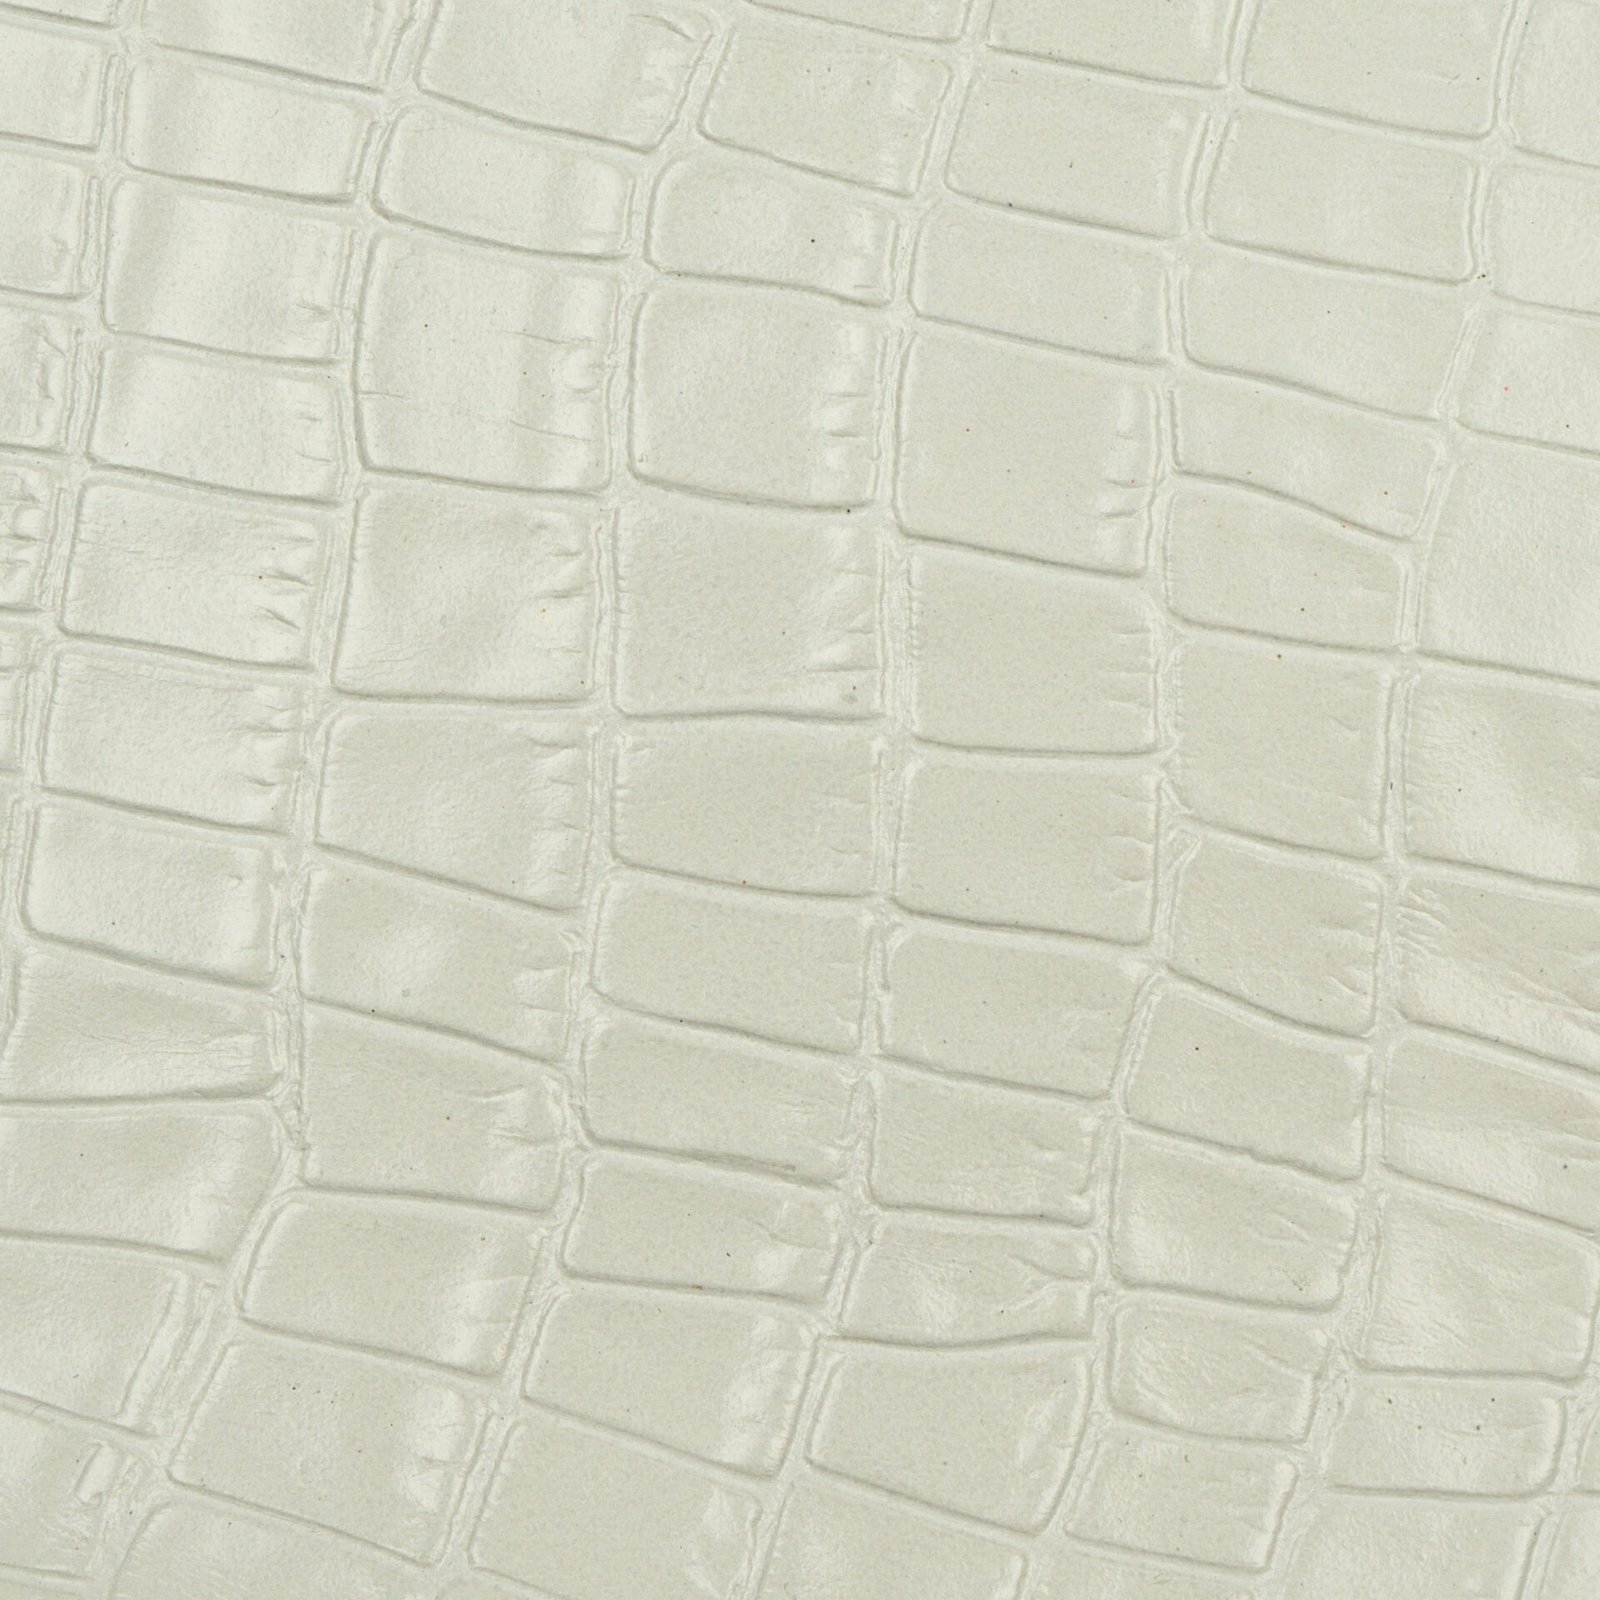 White crocodile leather for shoes